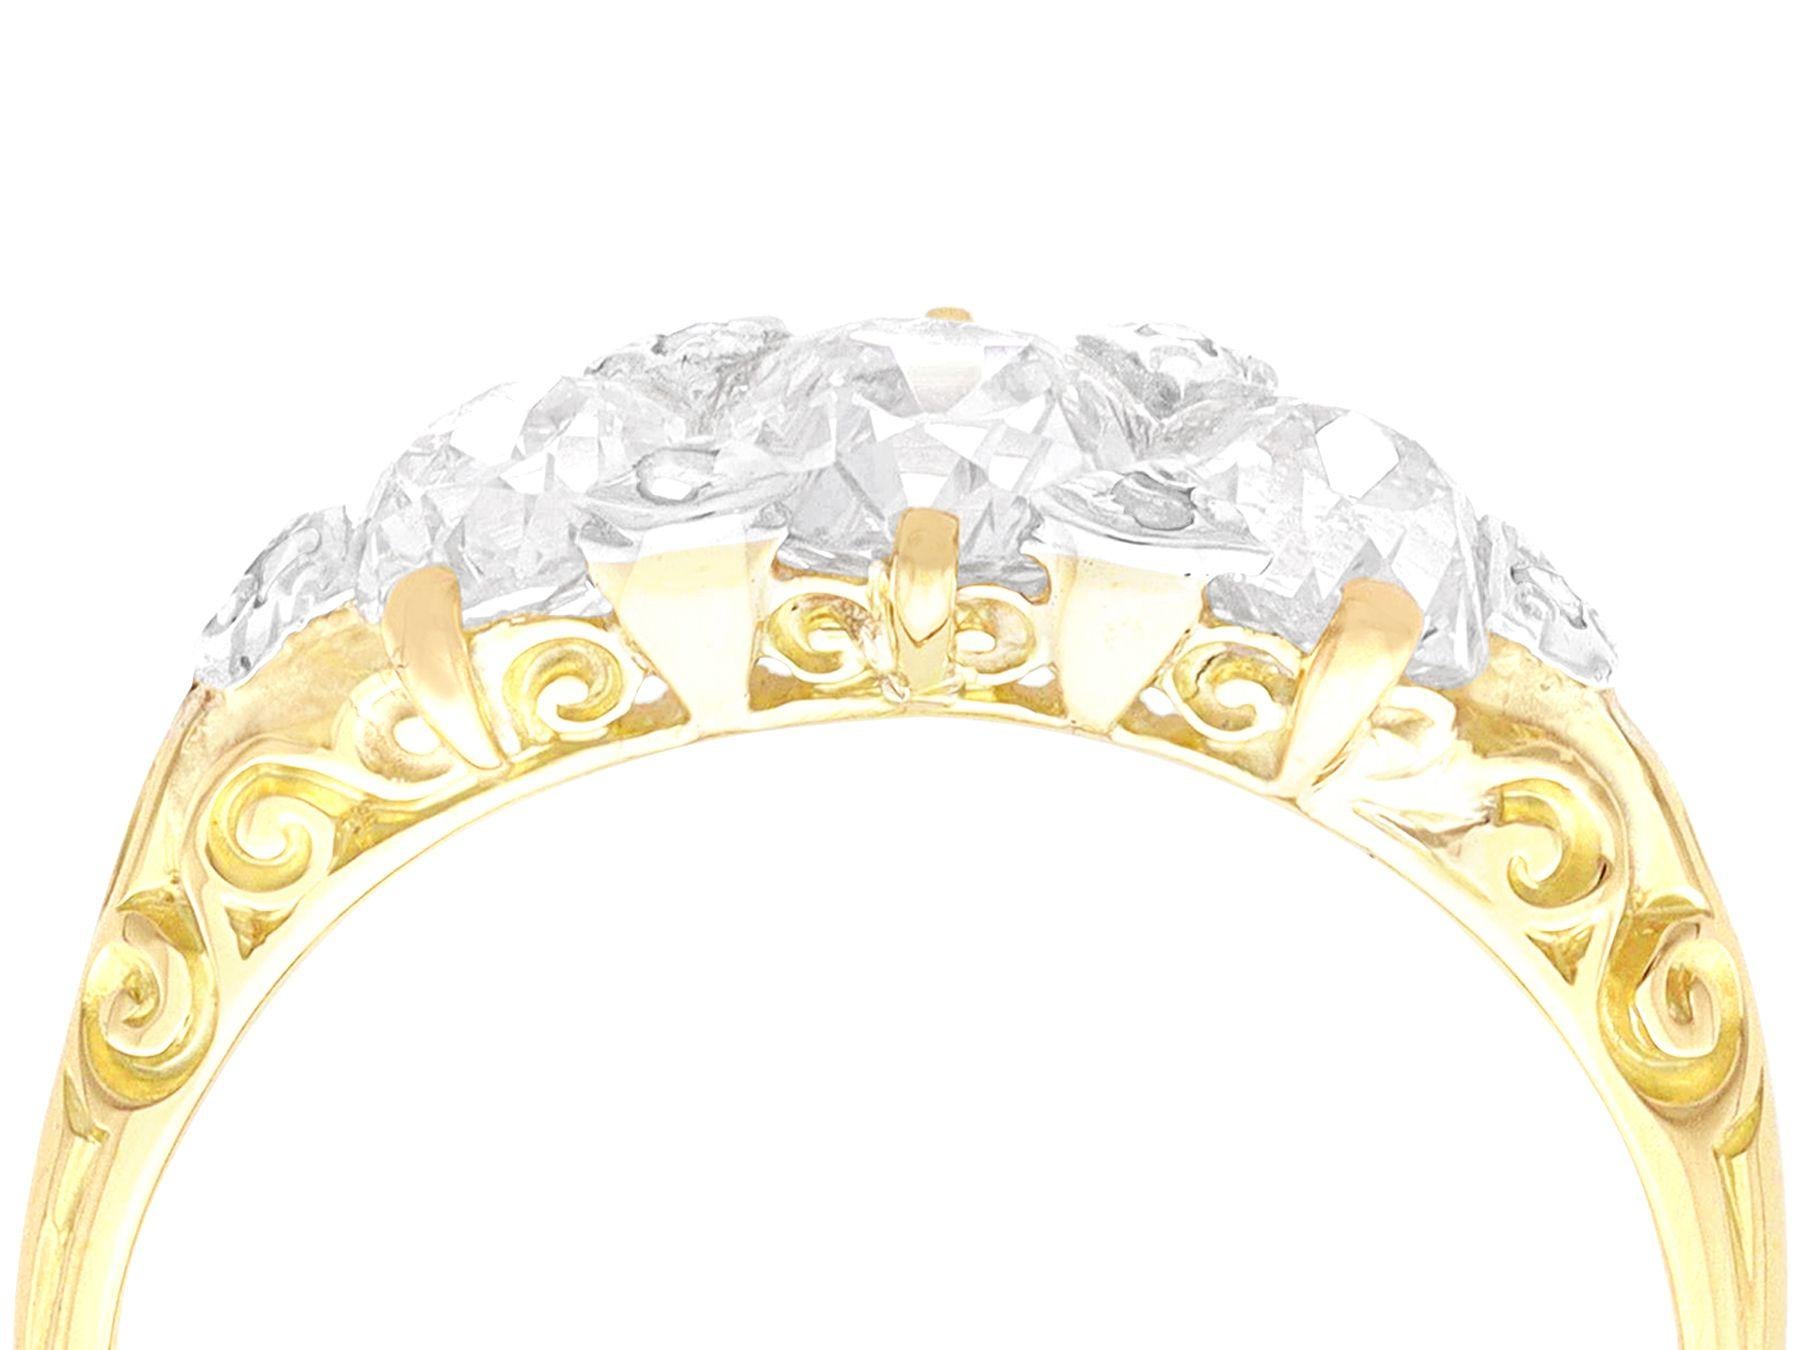 A stunning, fine and impressive antique 2.23 carat diamond, 18 karat yellow gold and silver set three stone ring; part of our diverse vintage diamond jewellery collections.

This stunning and impressive diamond trilogy ring has been crafted in 18k